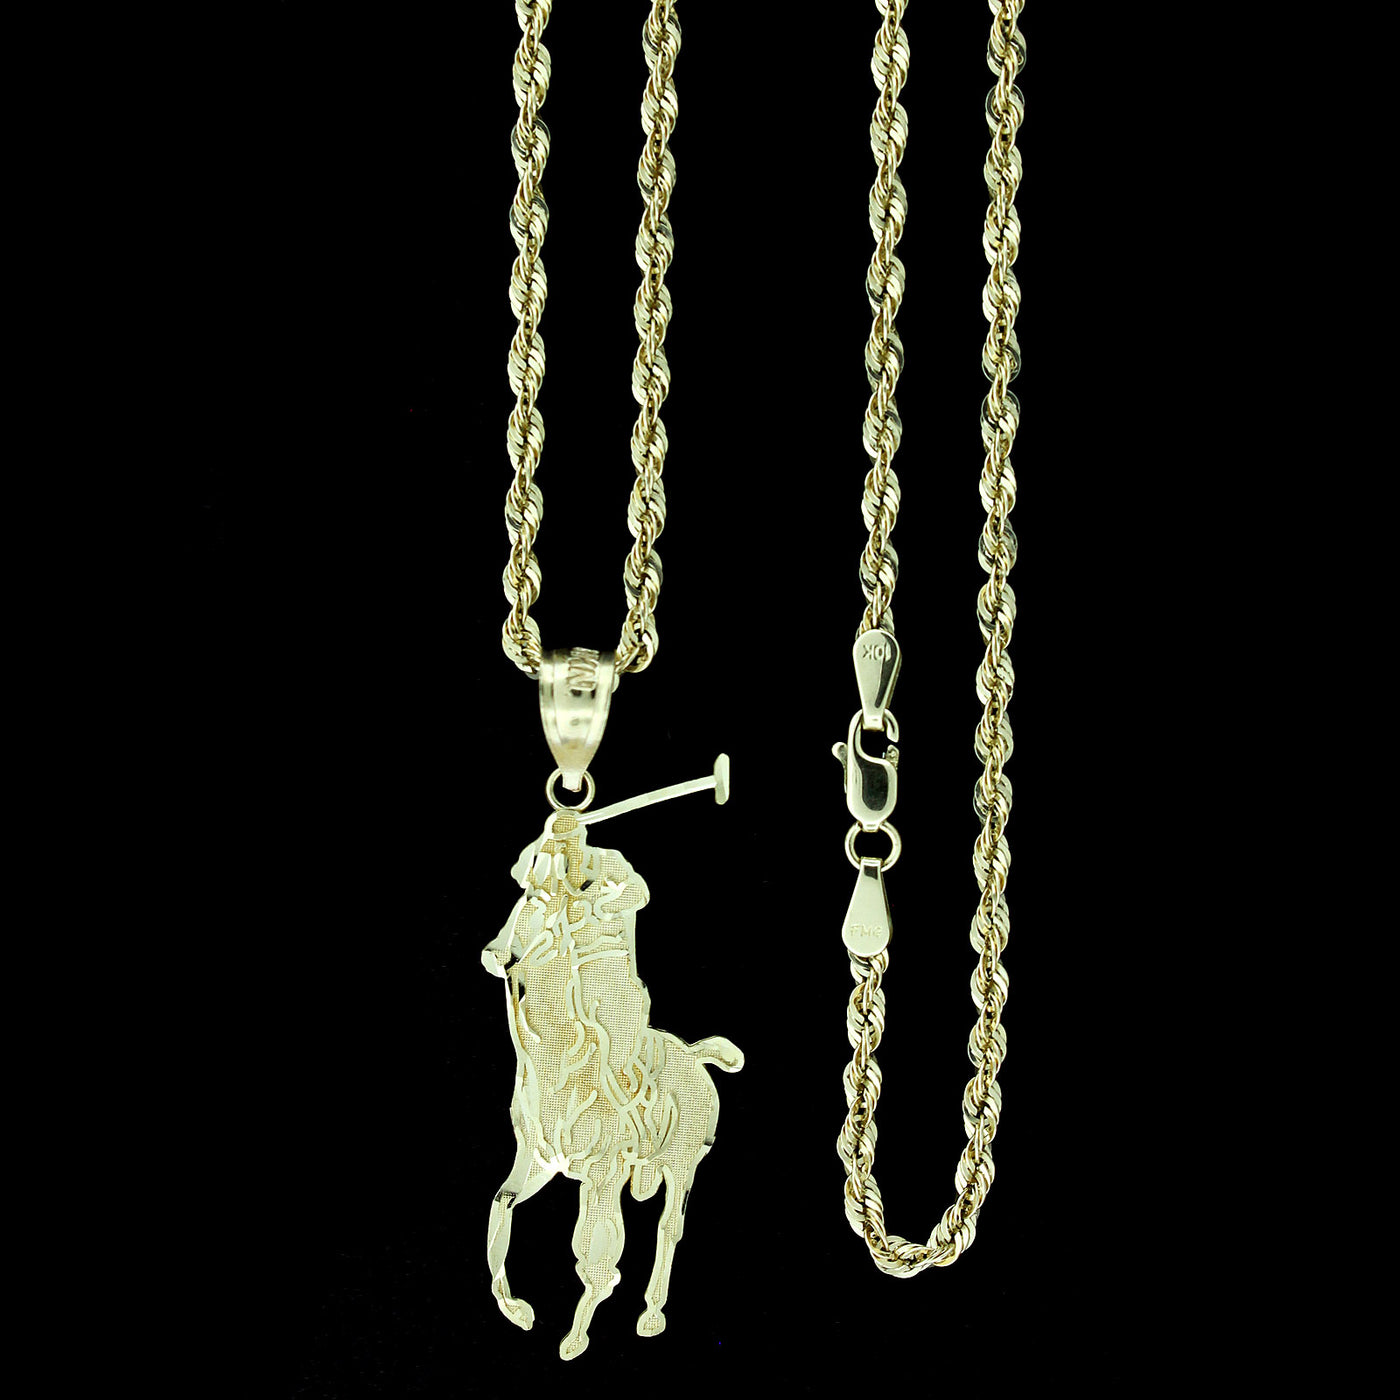 Mens 10K Solid Yellow Gold Polo Horse Rider Charm Pendant With 2.5mm Rope Chain Necklace Set